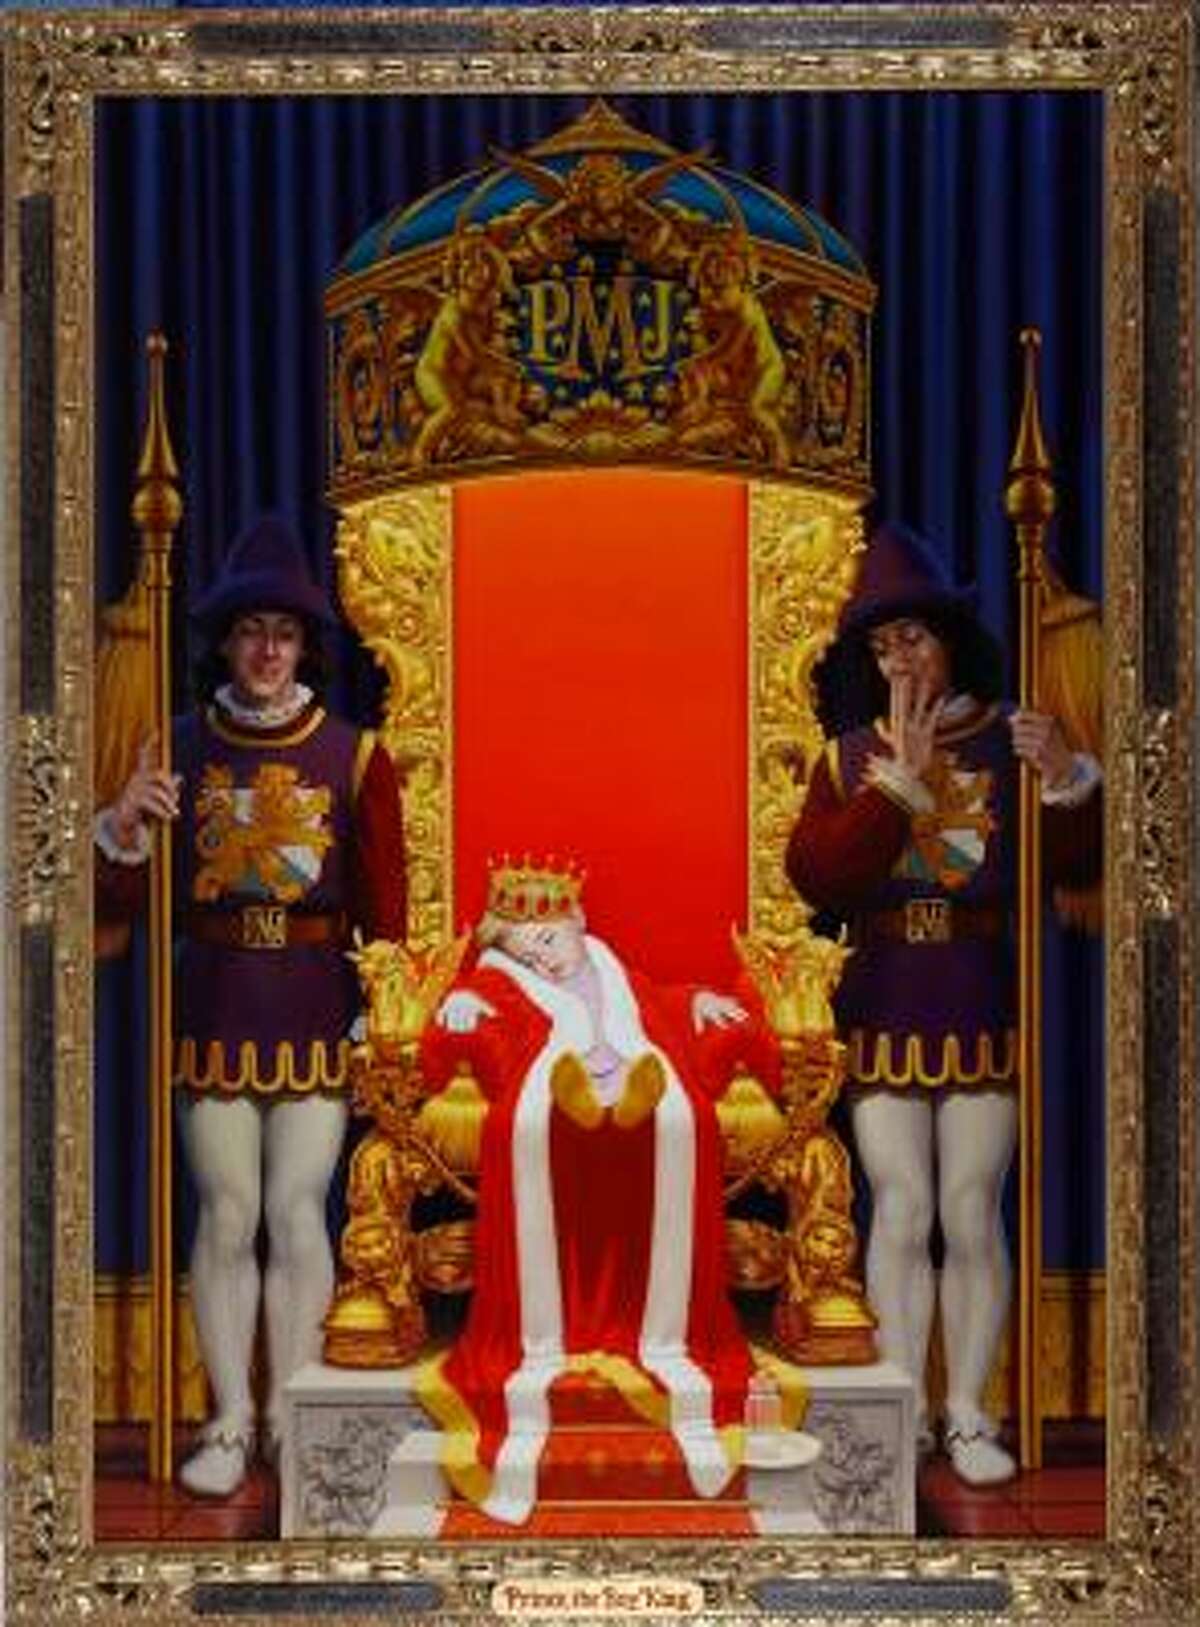 Oil on linen: "Prince, The Boy King", depicting a sleeping Prince Michael on a throne with attendants, signed David NordahlAuction Estimate: $3,000 - $5,000